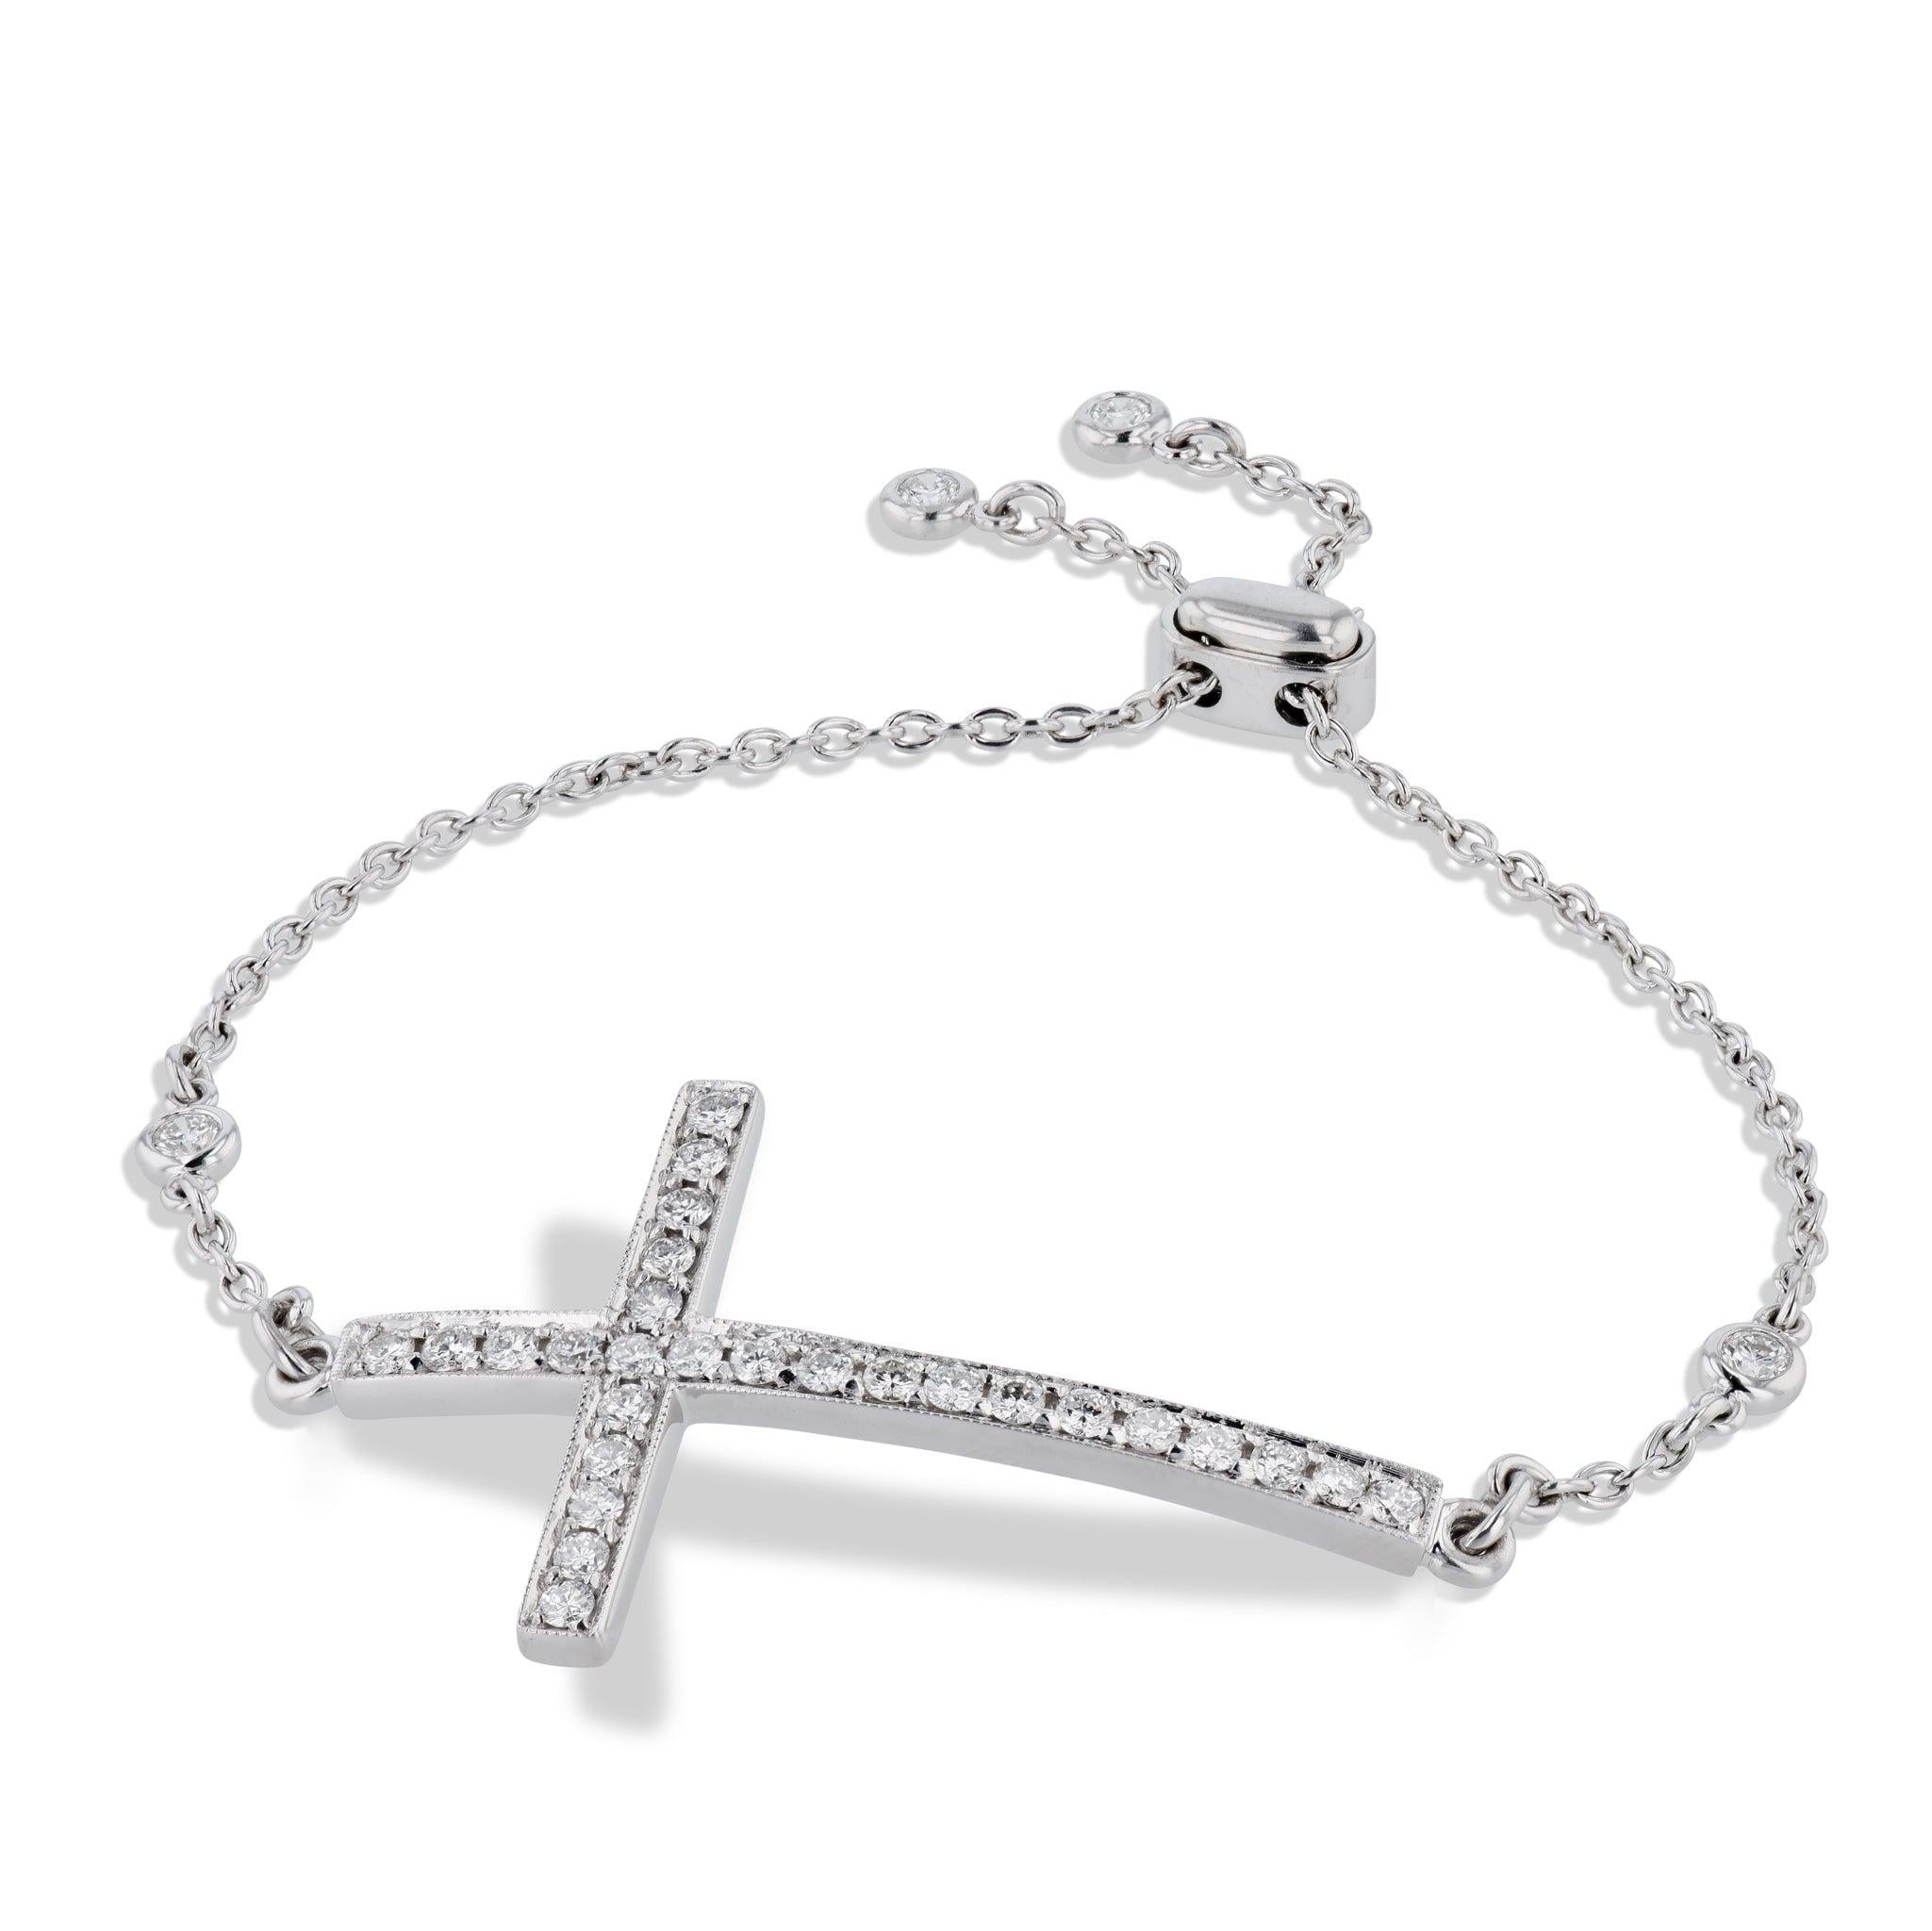 This exquisite Pave Diamond Cross Bracelet is crafted from luxurious 18kt White Gold and  illuminating pave diamonds. The milgrain diamond cross and bolo clasp lend an individualistic touch to this exquisite piece from H&H Jewels.
Pave Diamond Cross